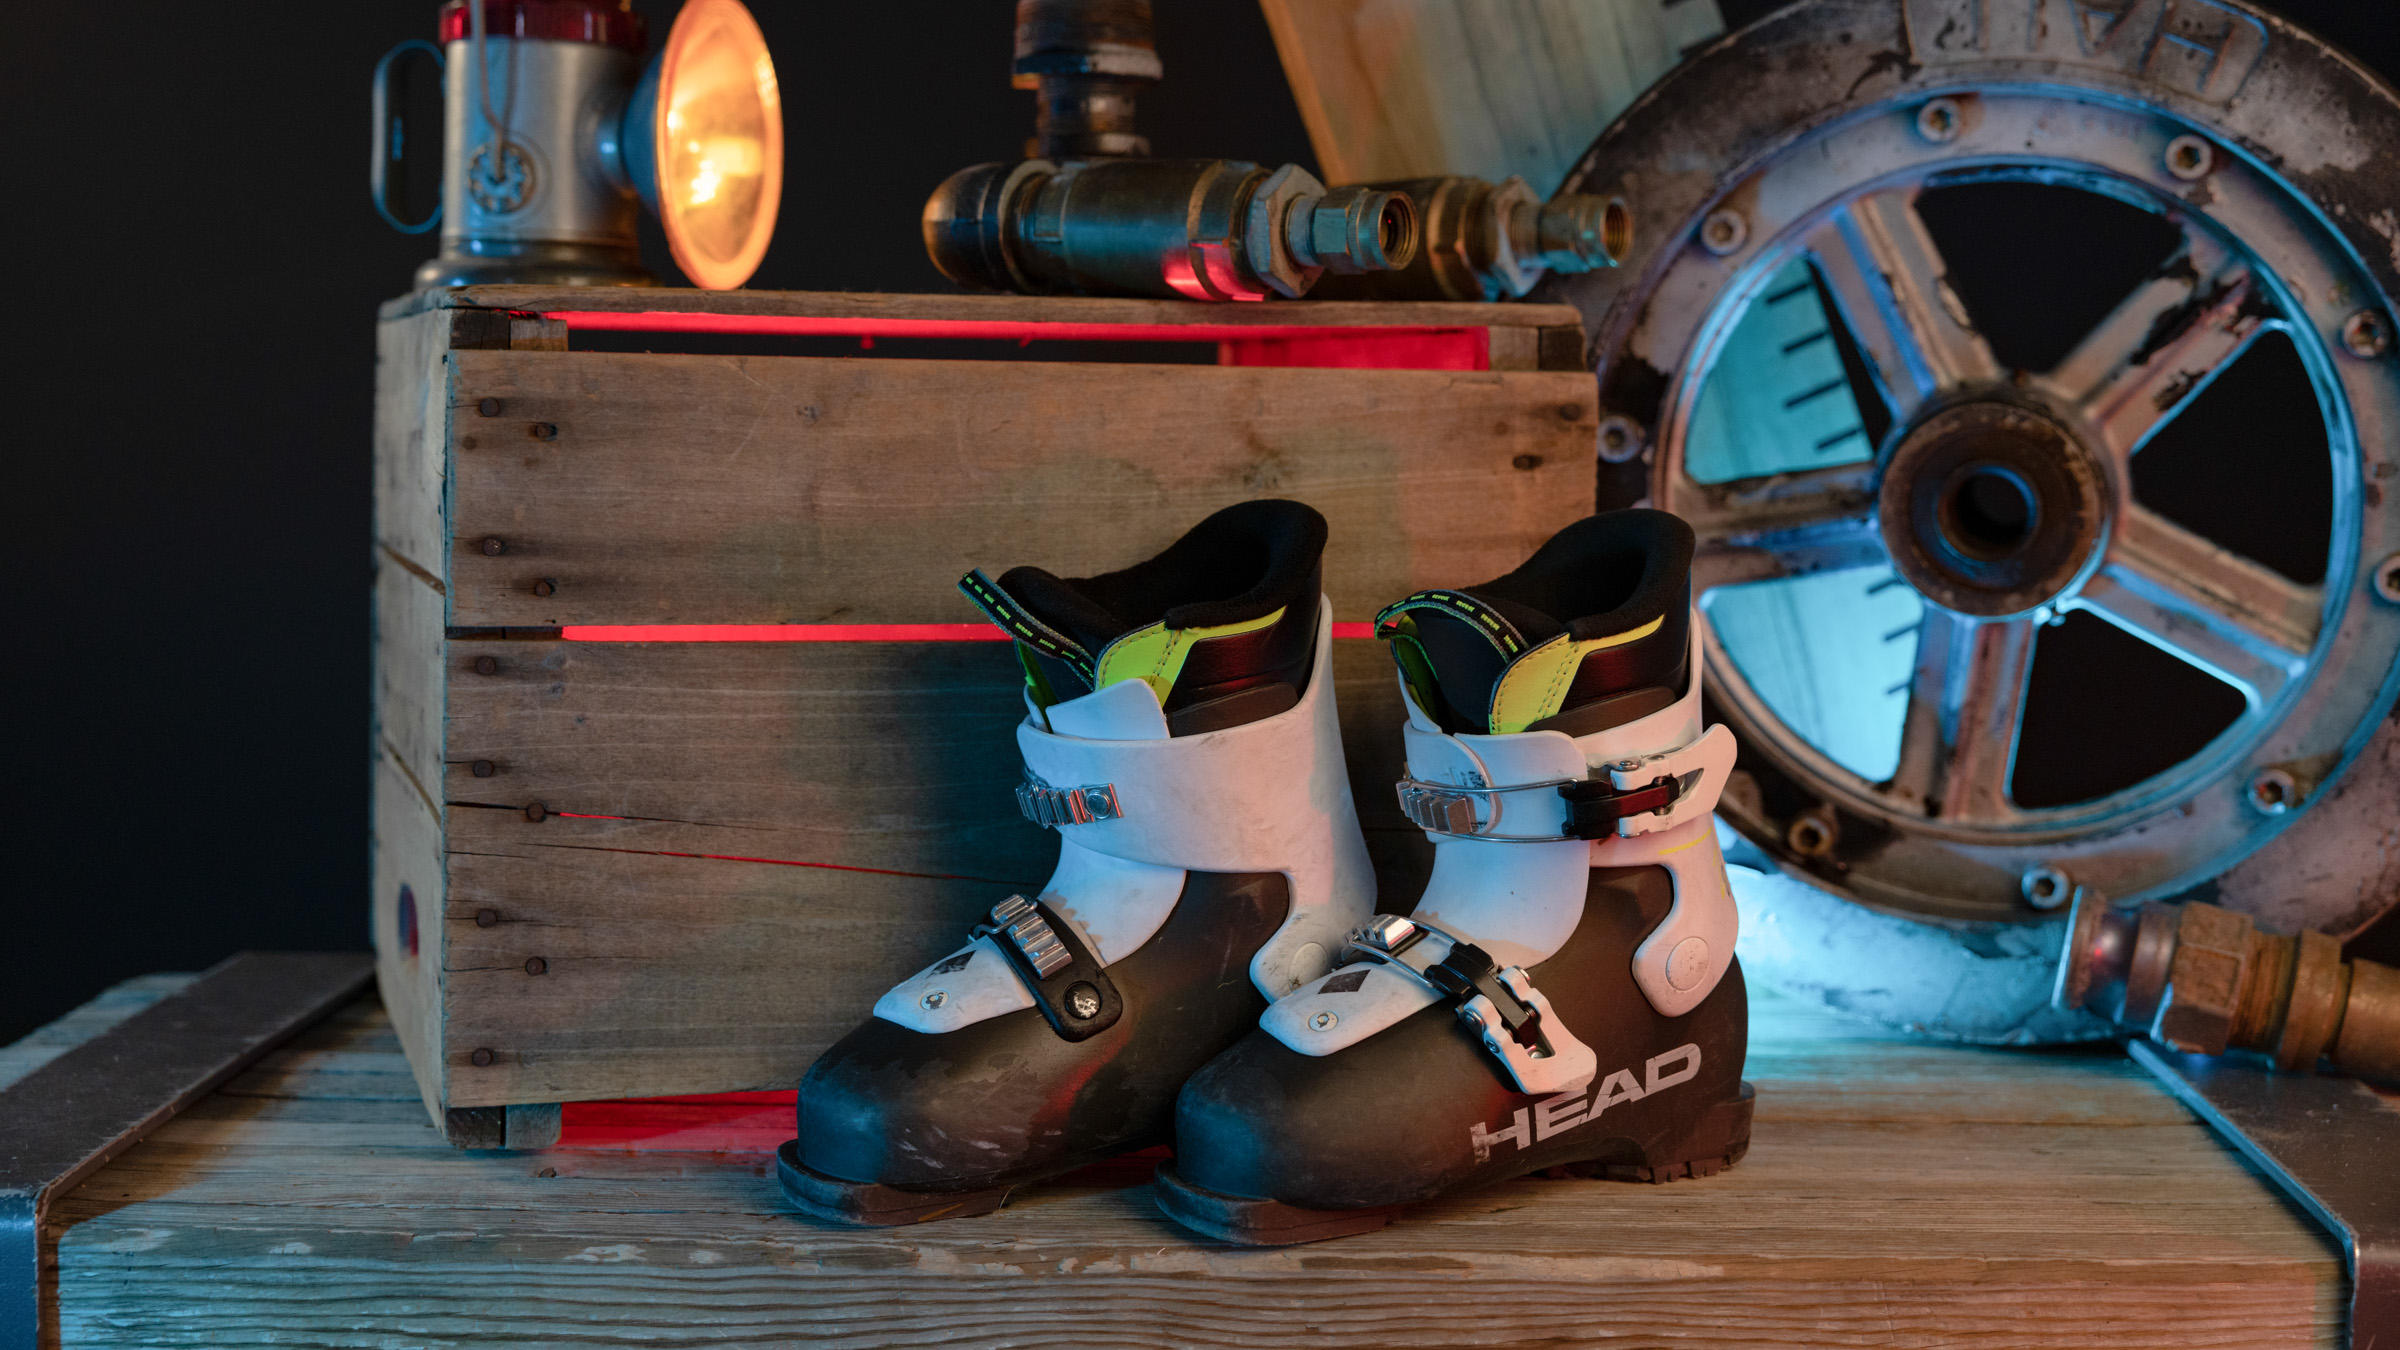 Ski boots leaning against a wooden box